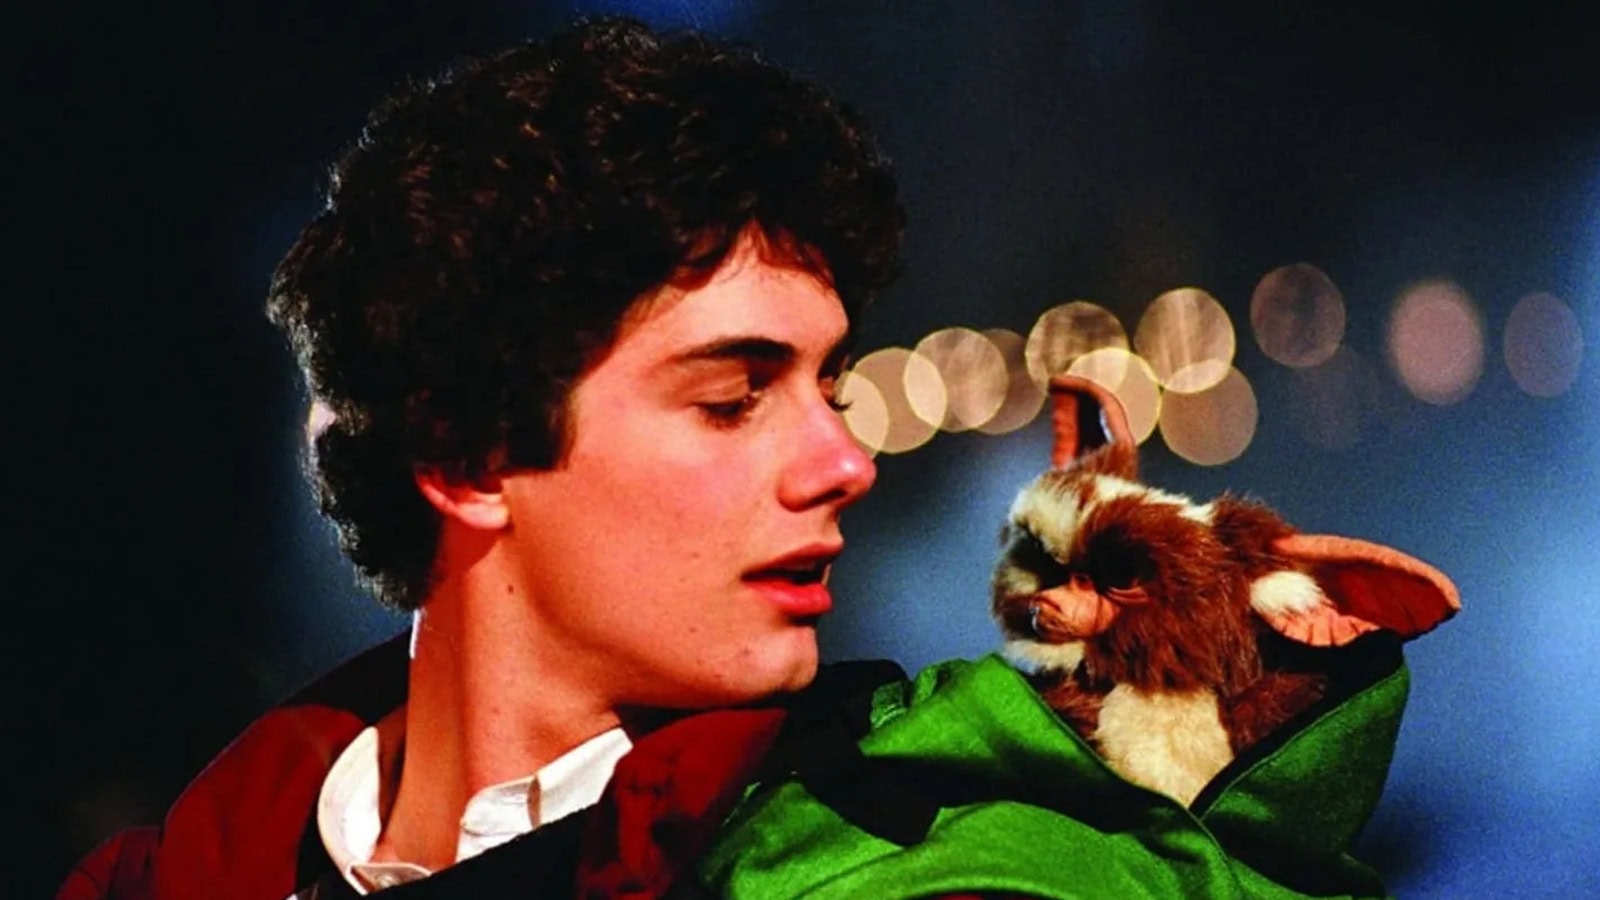 How Gremlins Transformed From a Gory Horror Script to a Family Classic